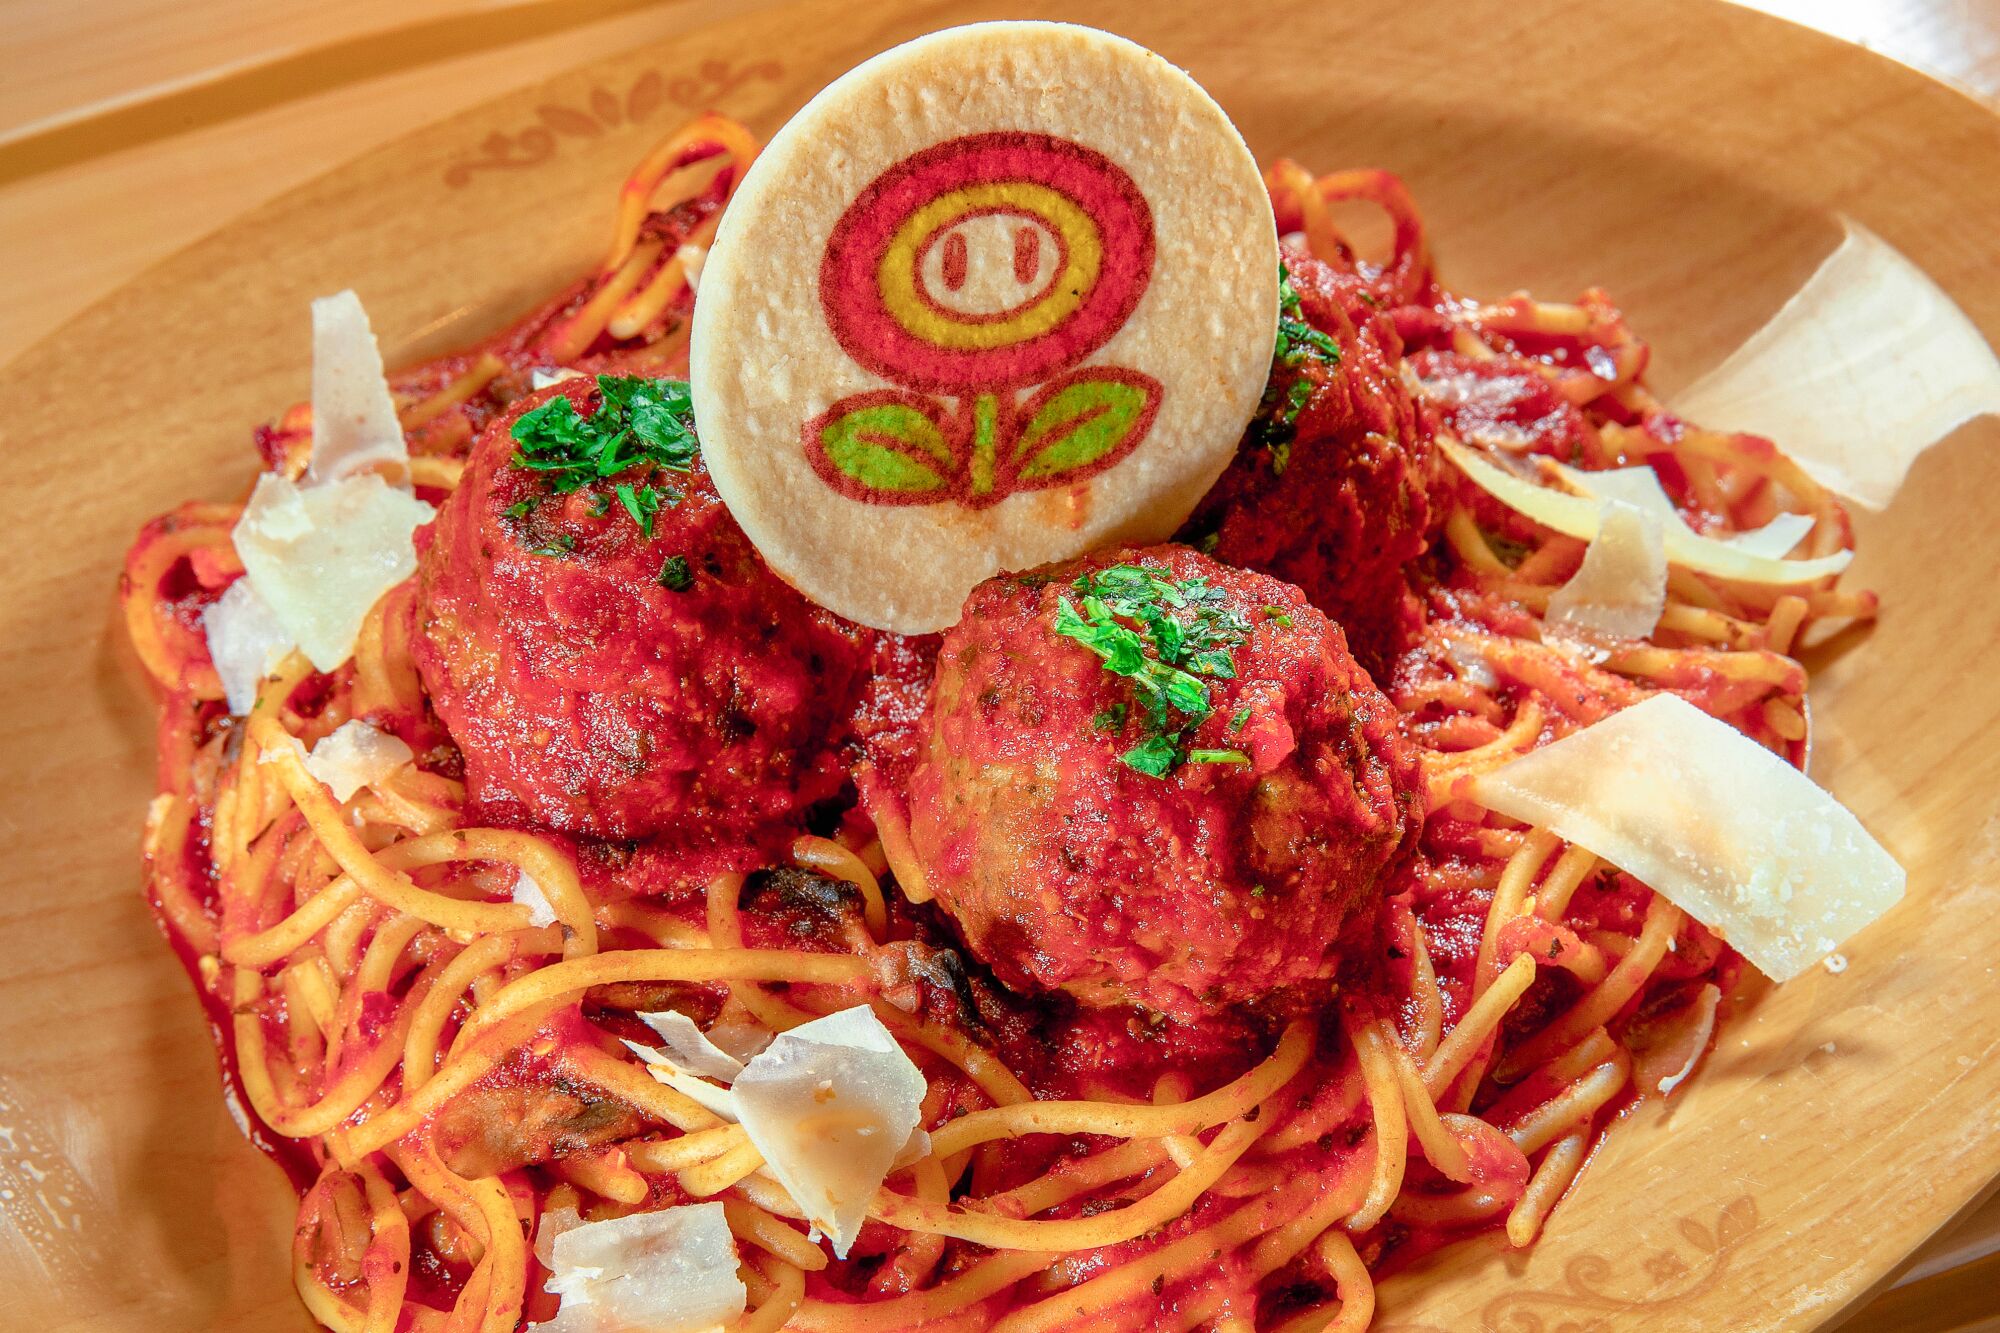 Fire Flower Spaghetti & Meatballs are on the menu at Toadstool Cafe.